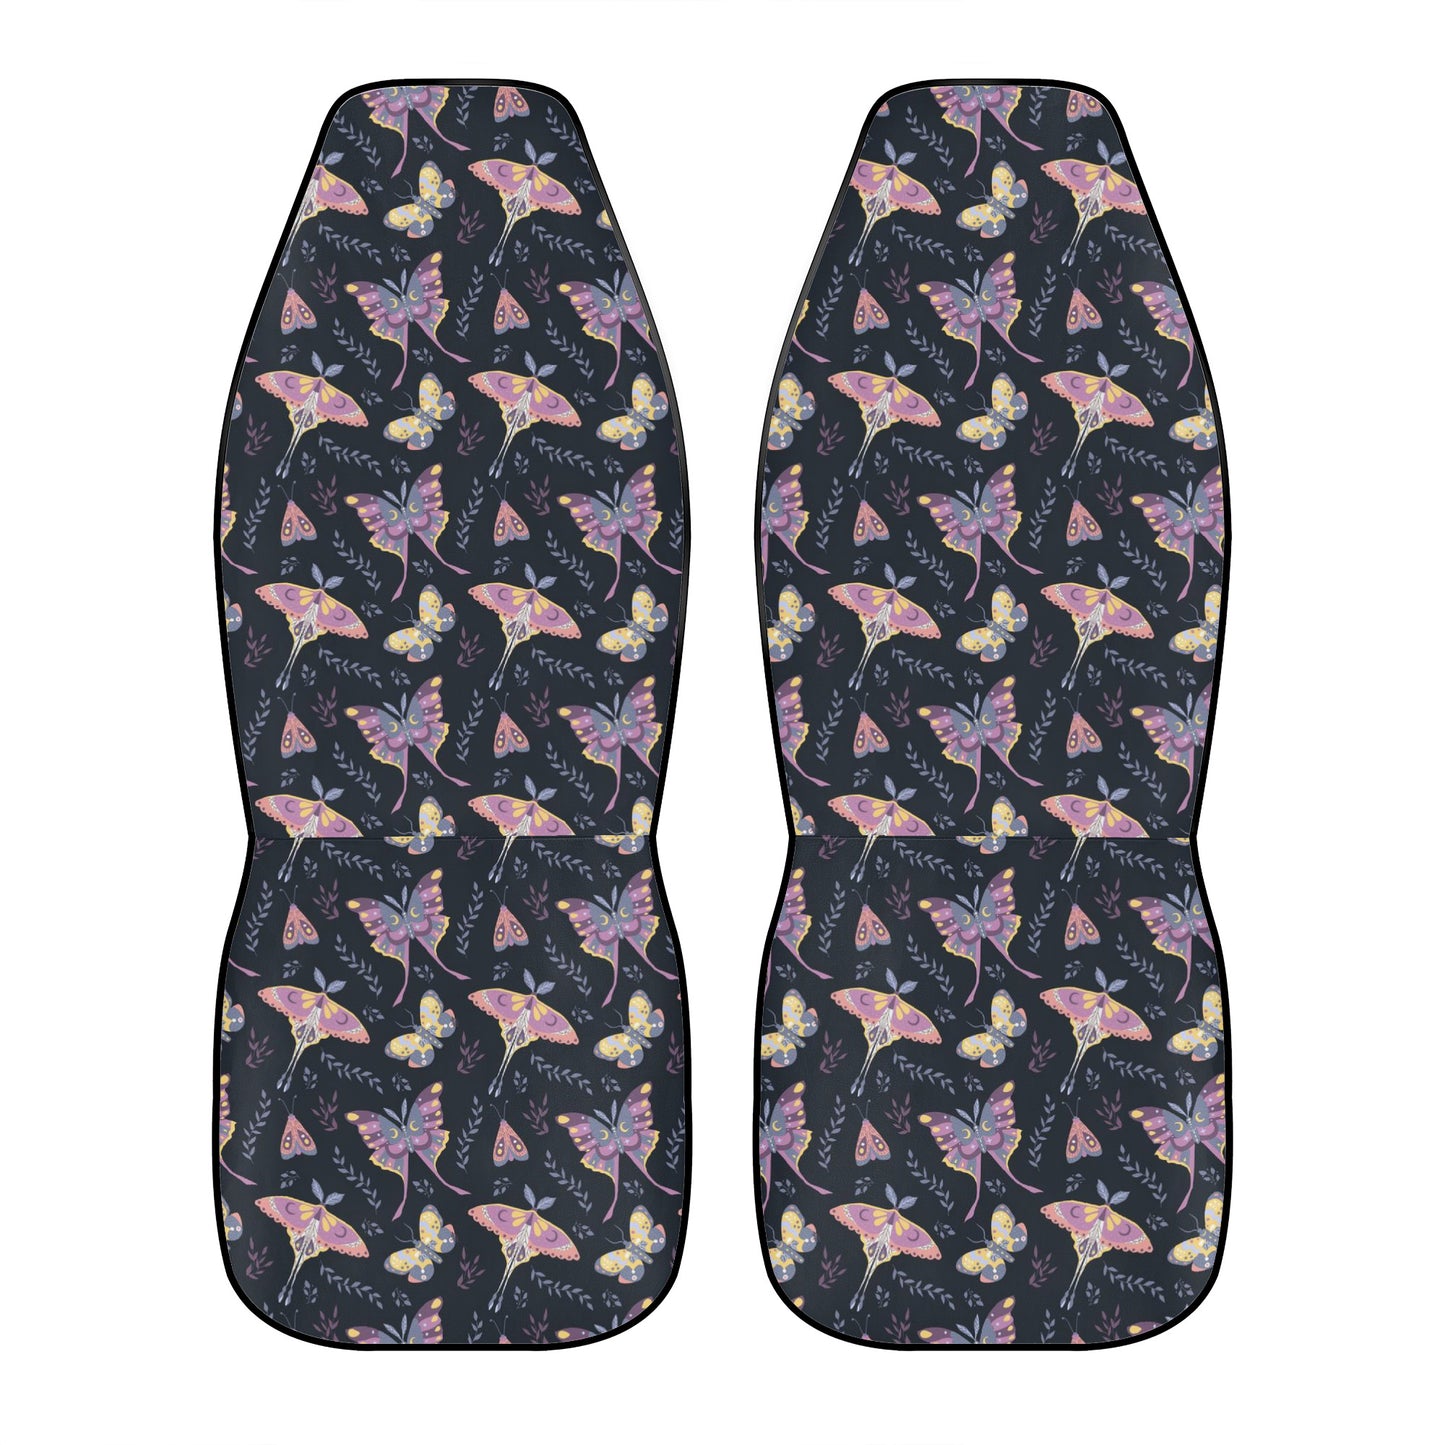 Moth and Leaves Car Seat Cover Set